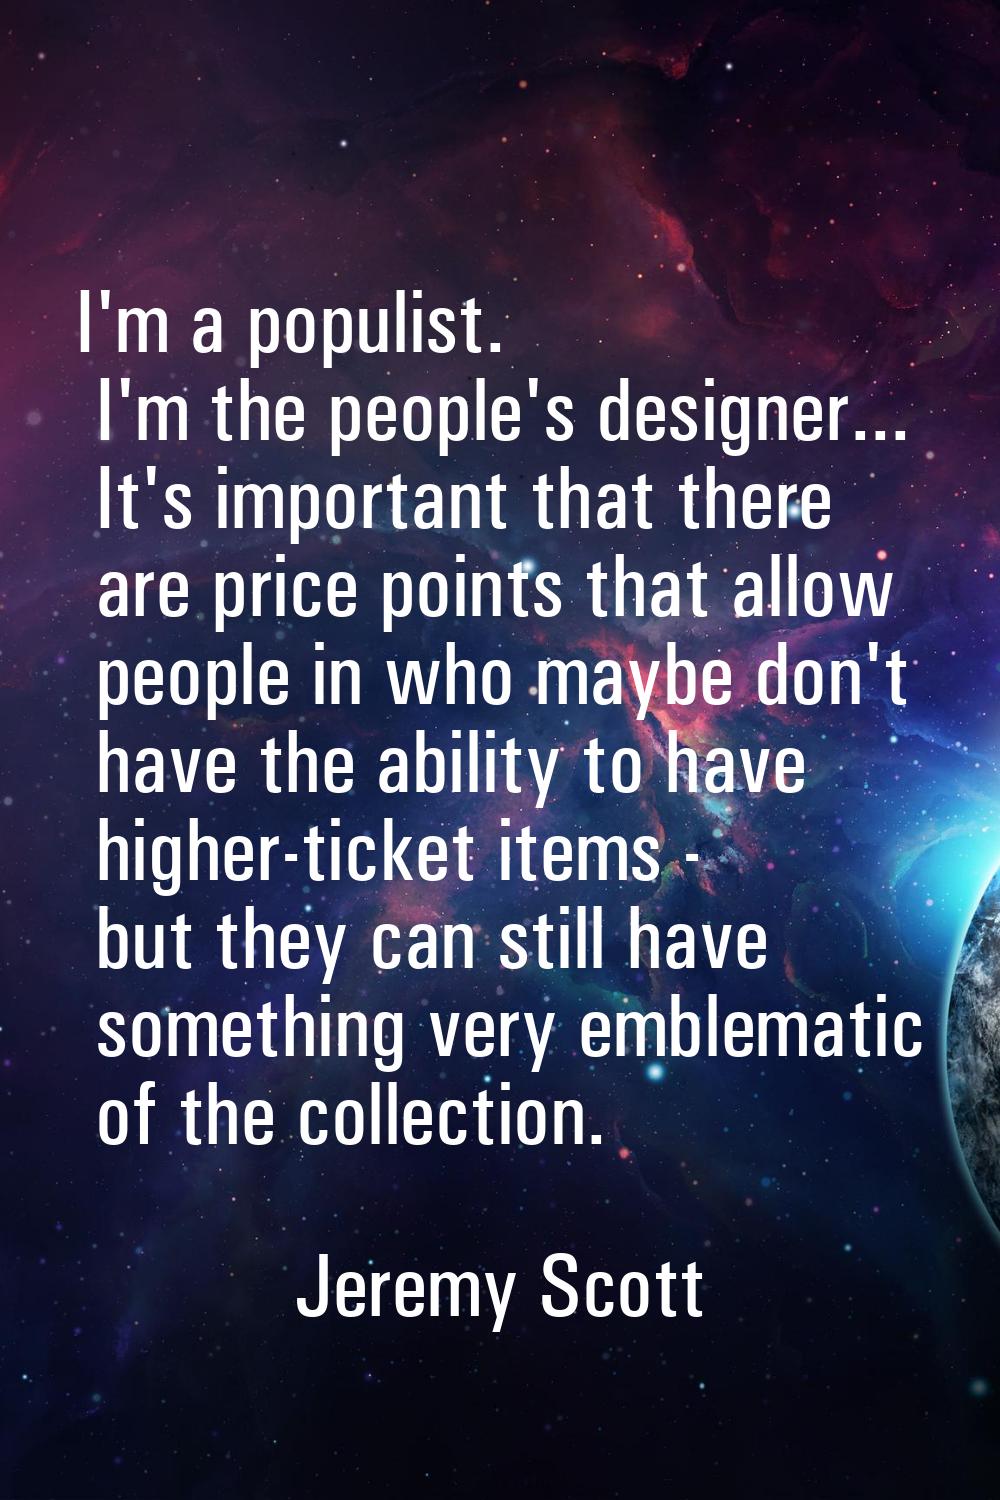 I'm a populist. I'm the people's designer... It's important that there are price points that allow 